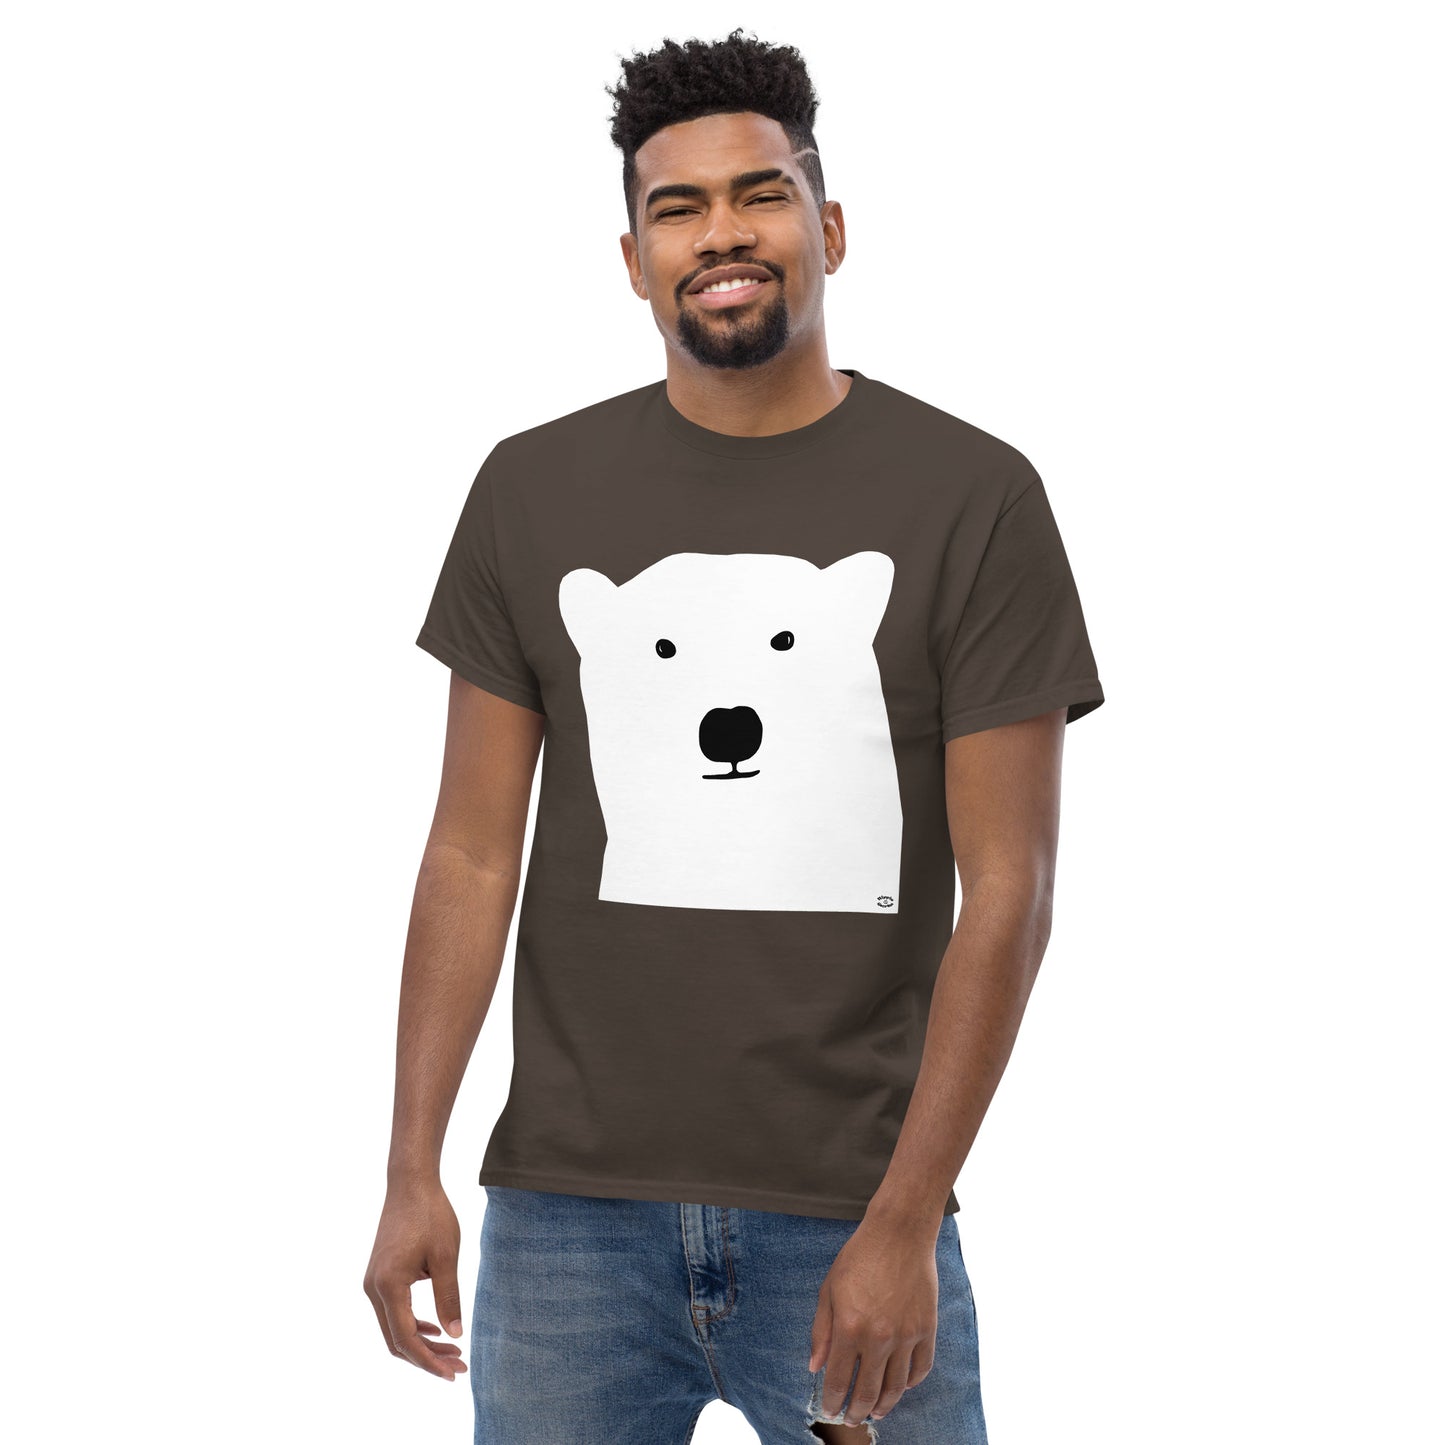 A picture of a man wearing a short sleeve tshirt with a kool polar bear face on the front-dark chocolate-front